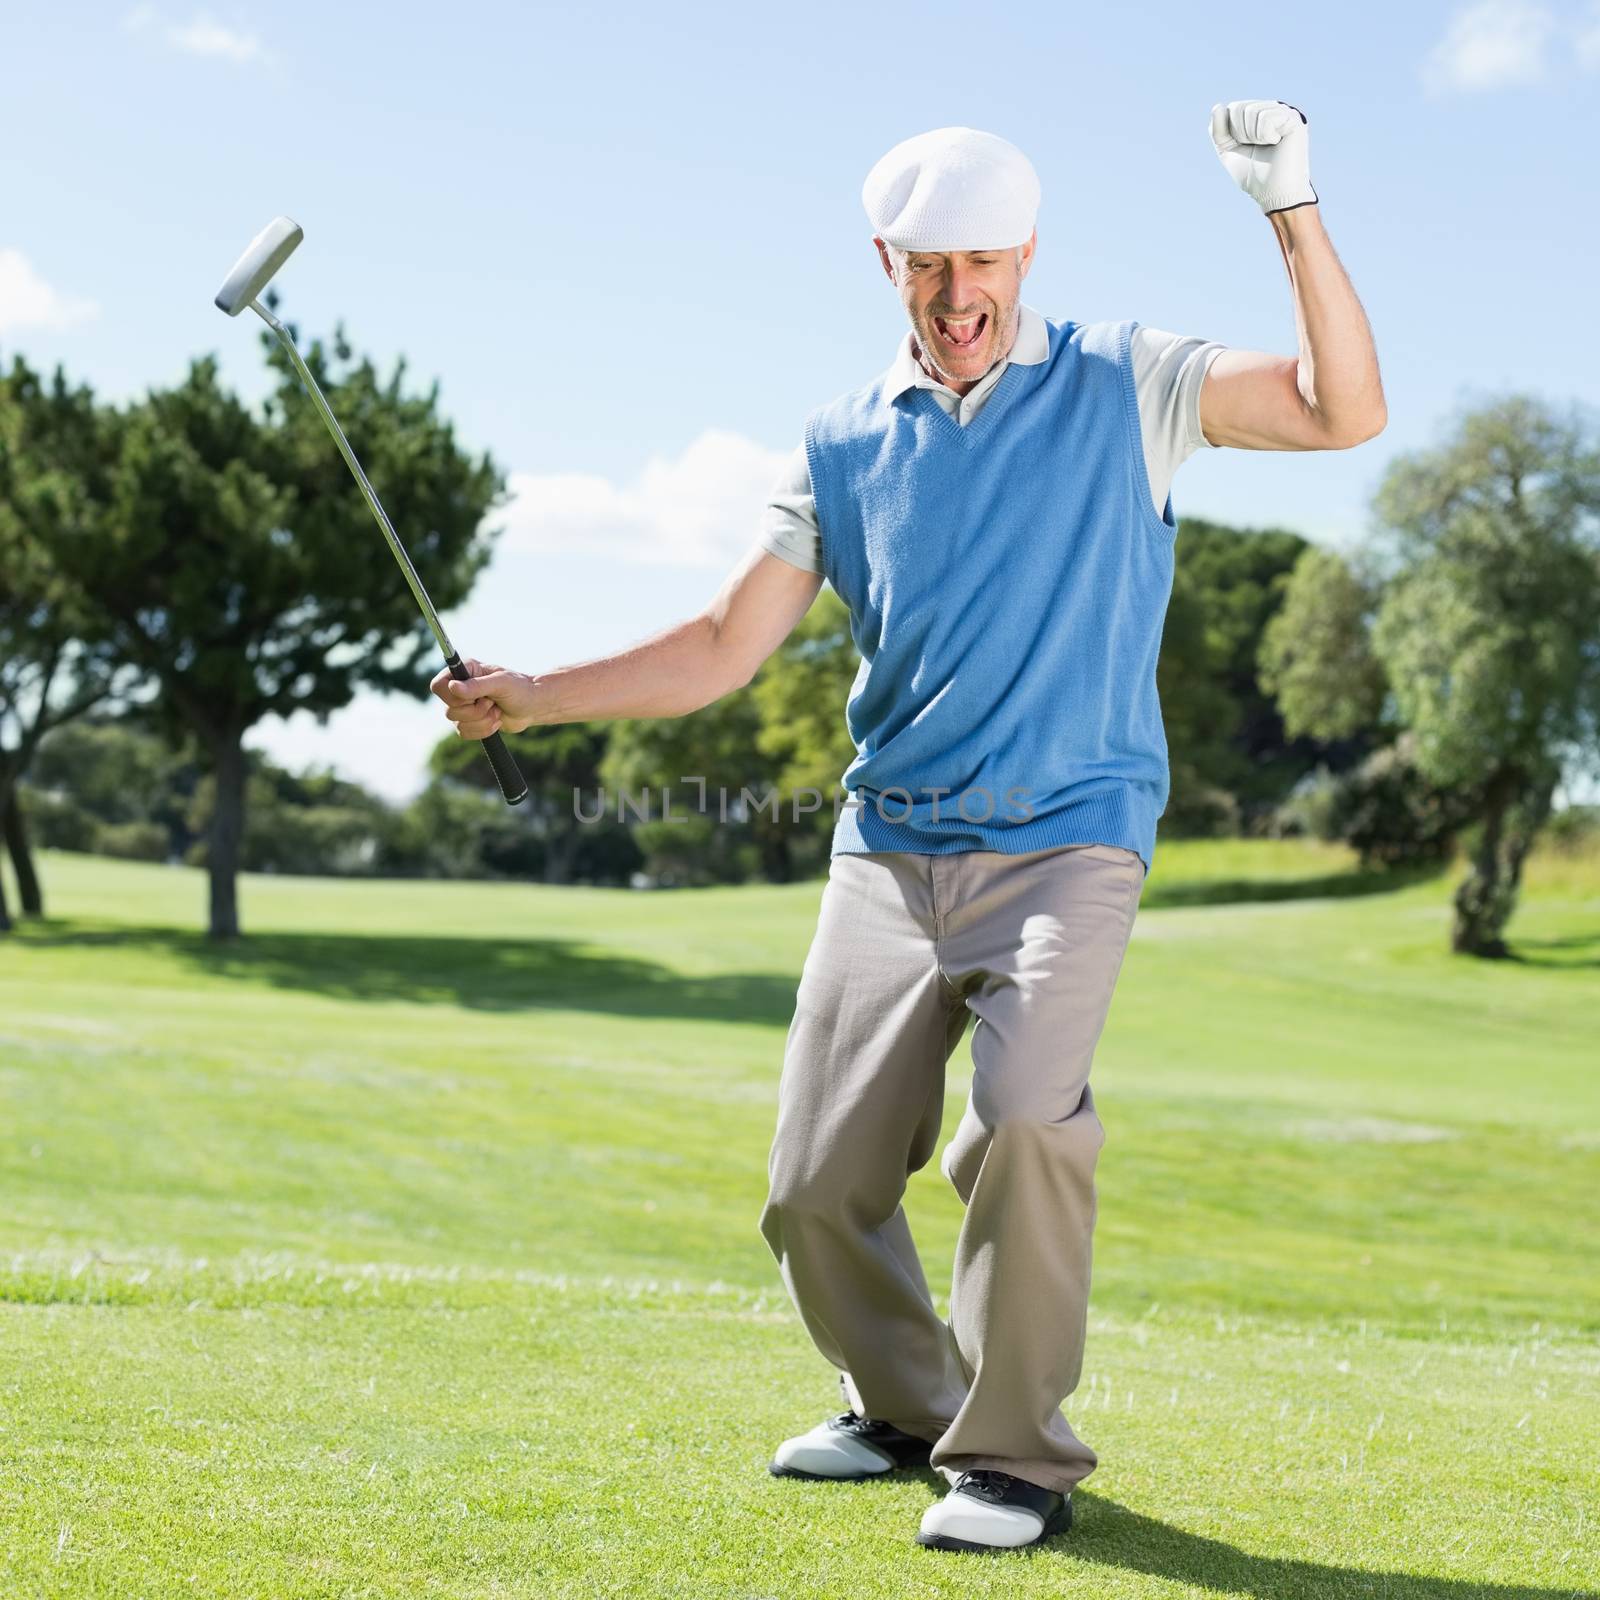 Excited golfer cheering on putting green by Wavebreakmedia